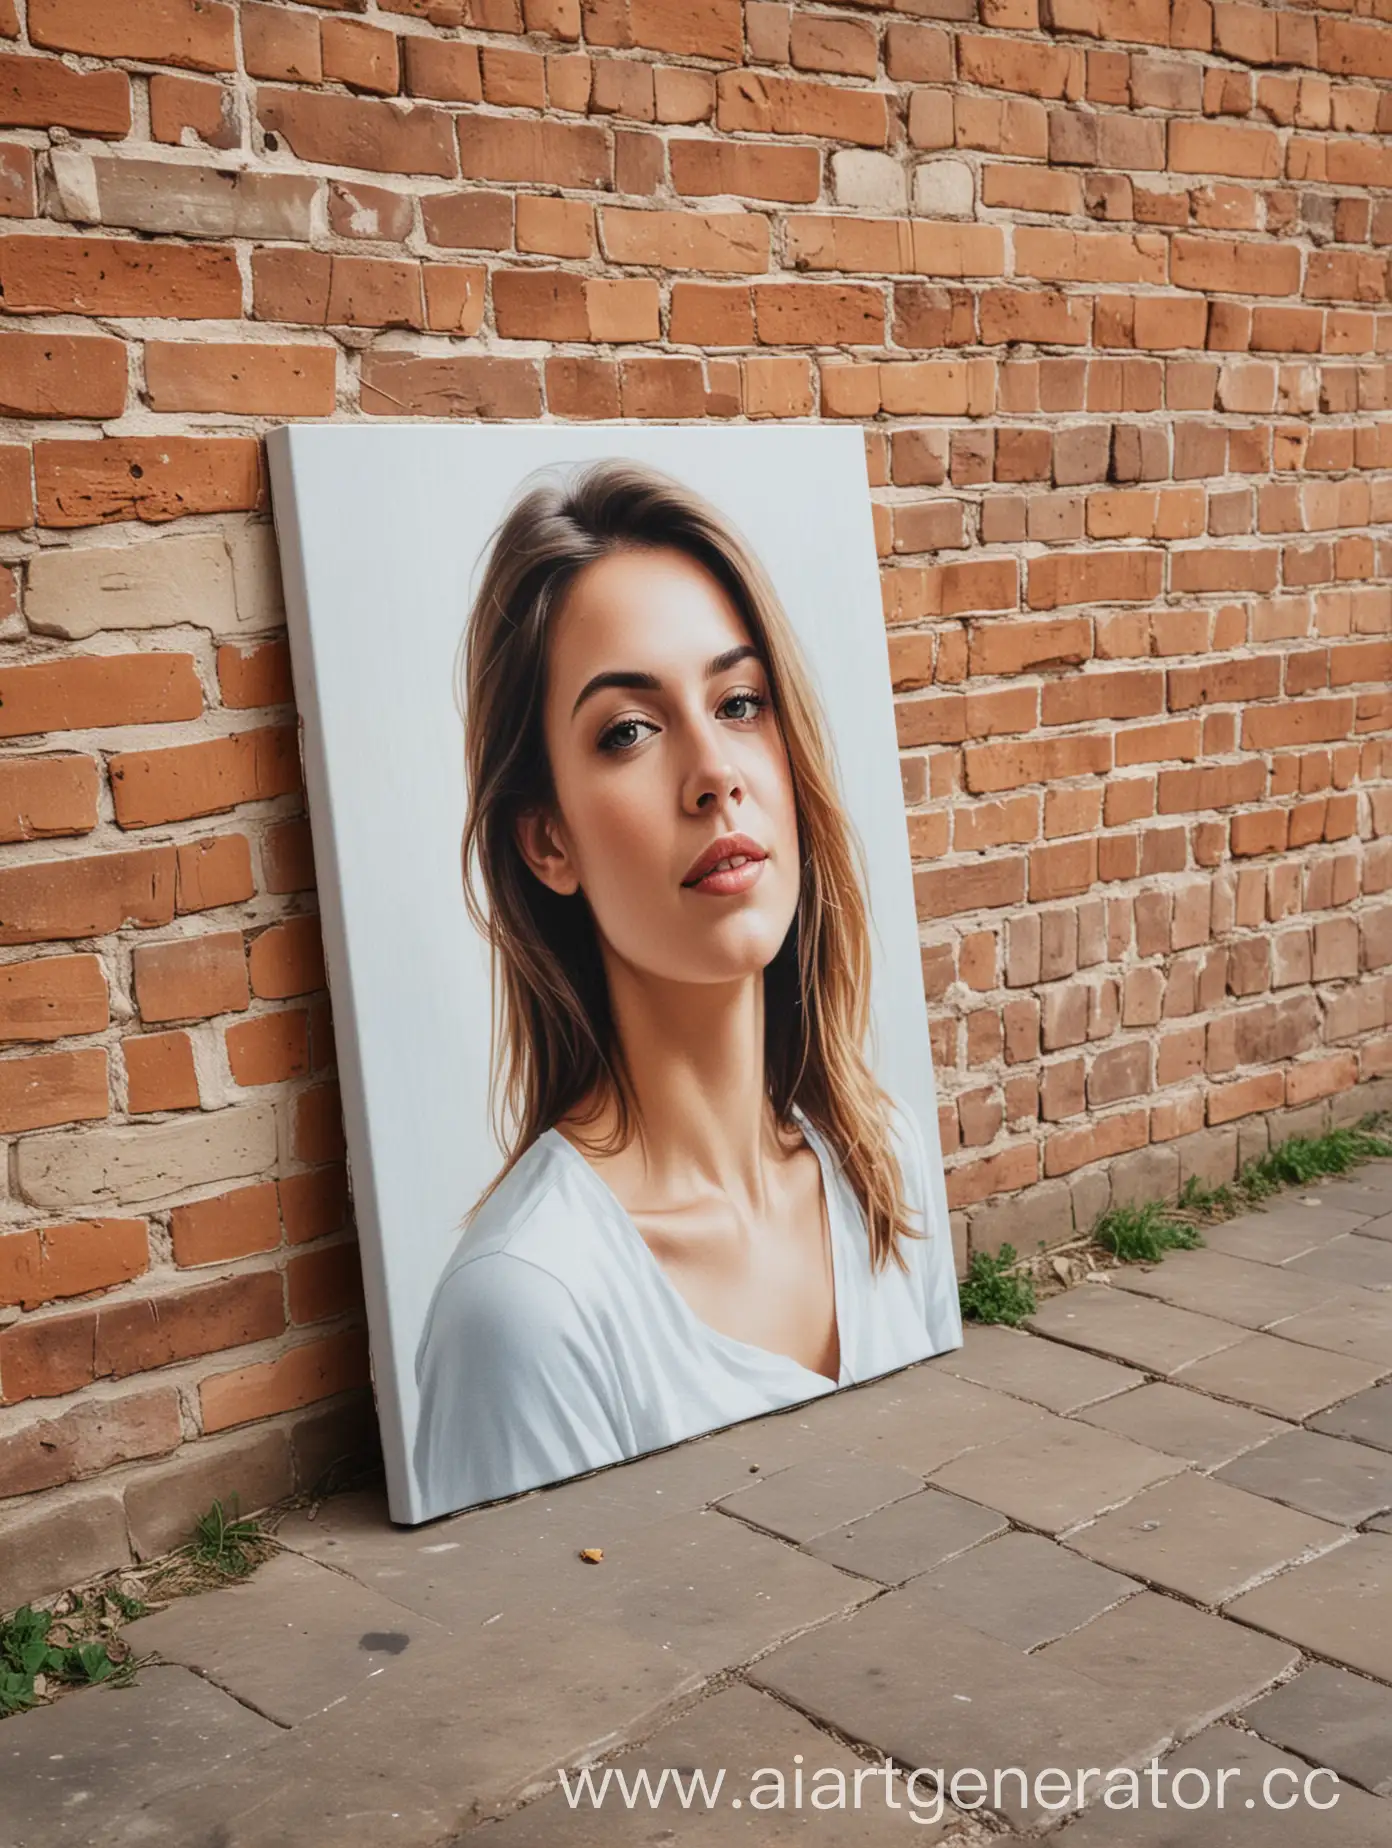 Outdoor-Portrait-Painting-Against-Brick-Wall-in-Park